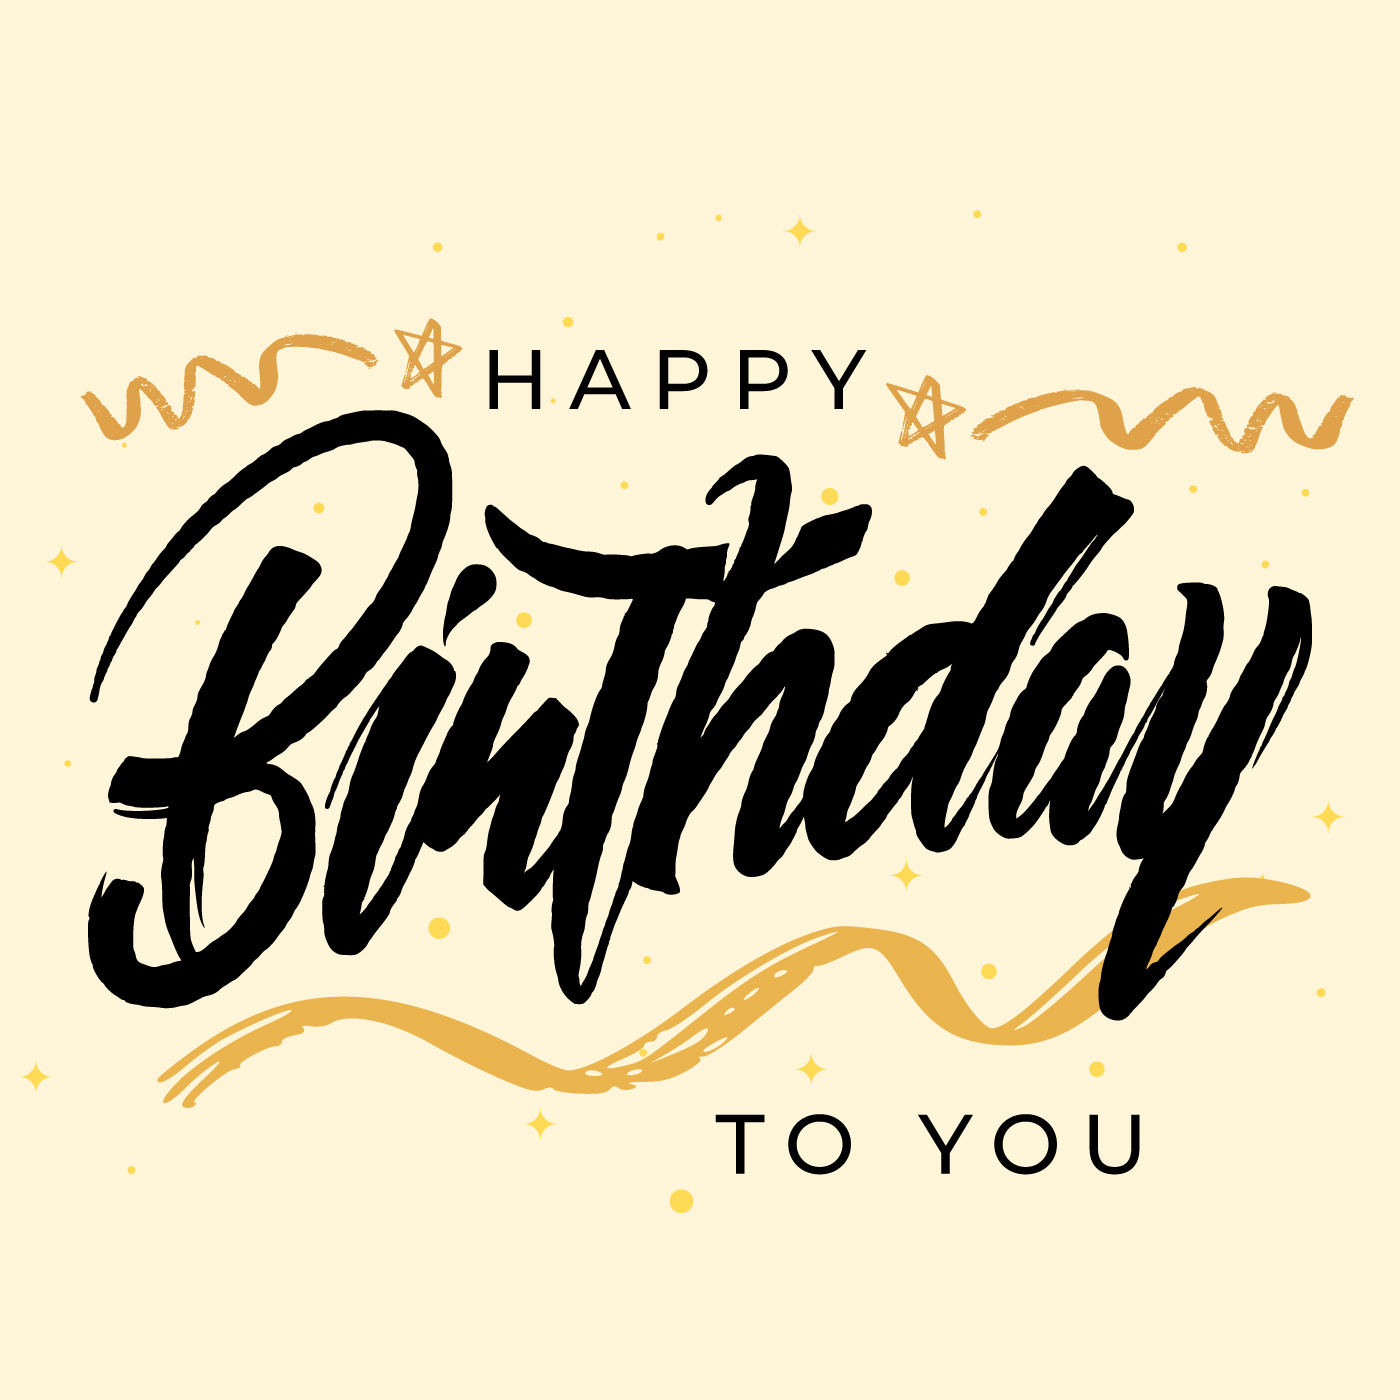 Download Happy Birthday Modern Brush Lettering Greeting Card ...